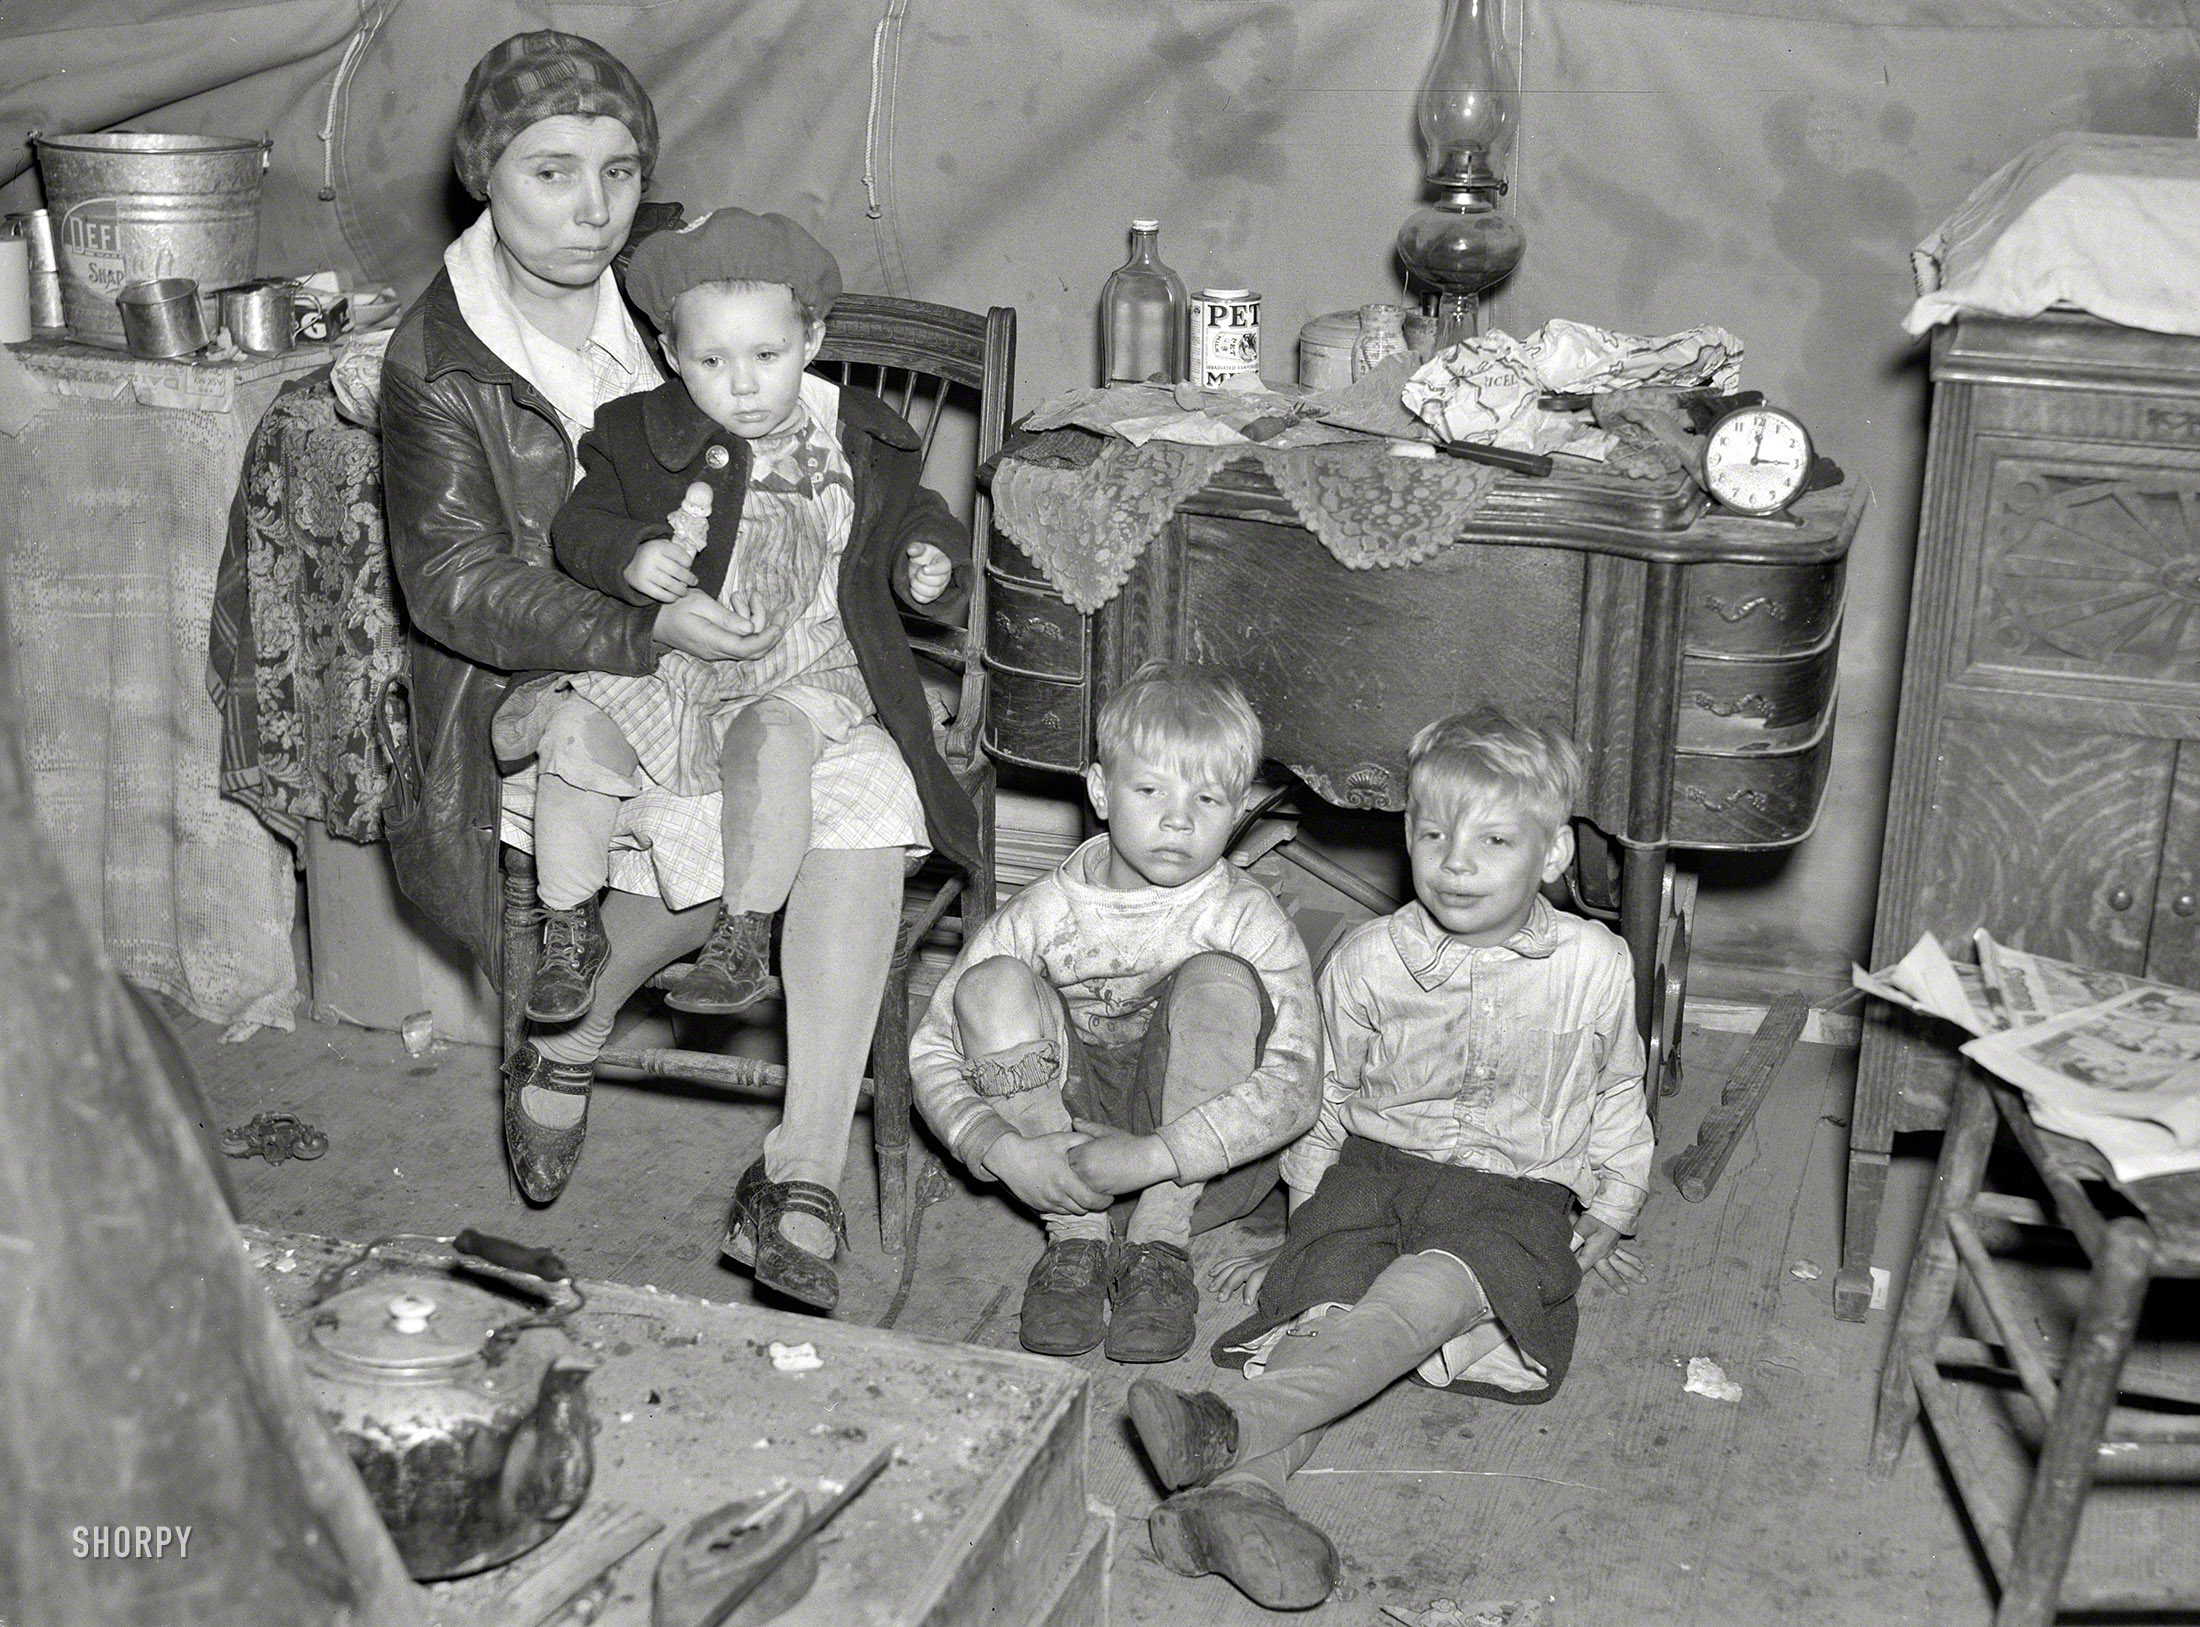 April 1937. "Flood refugee family in tent at Tent City near Shawneetown, Illinois." Photo by Russell Lee for the Resettlement Administration. View full size.